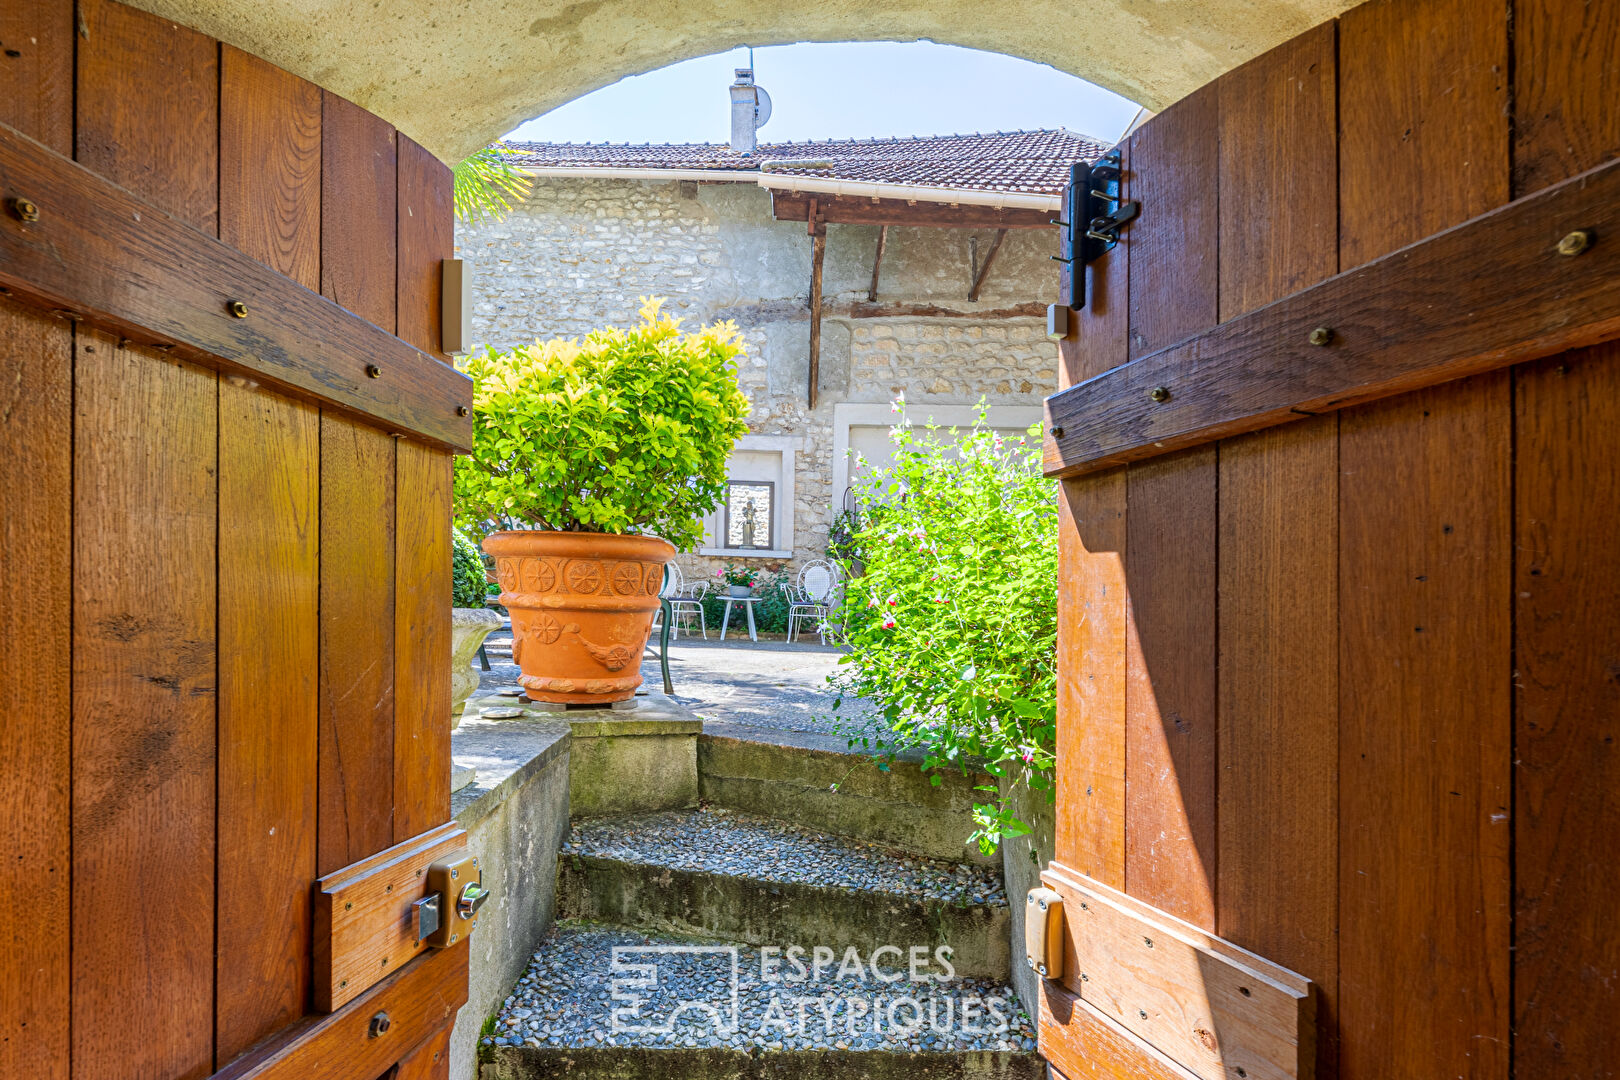 Explosion of charm in a sought-after hamlet near Guerville